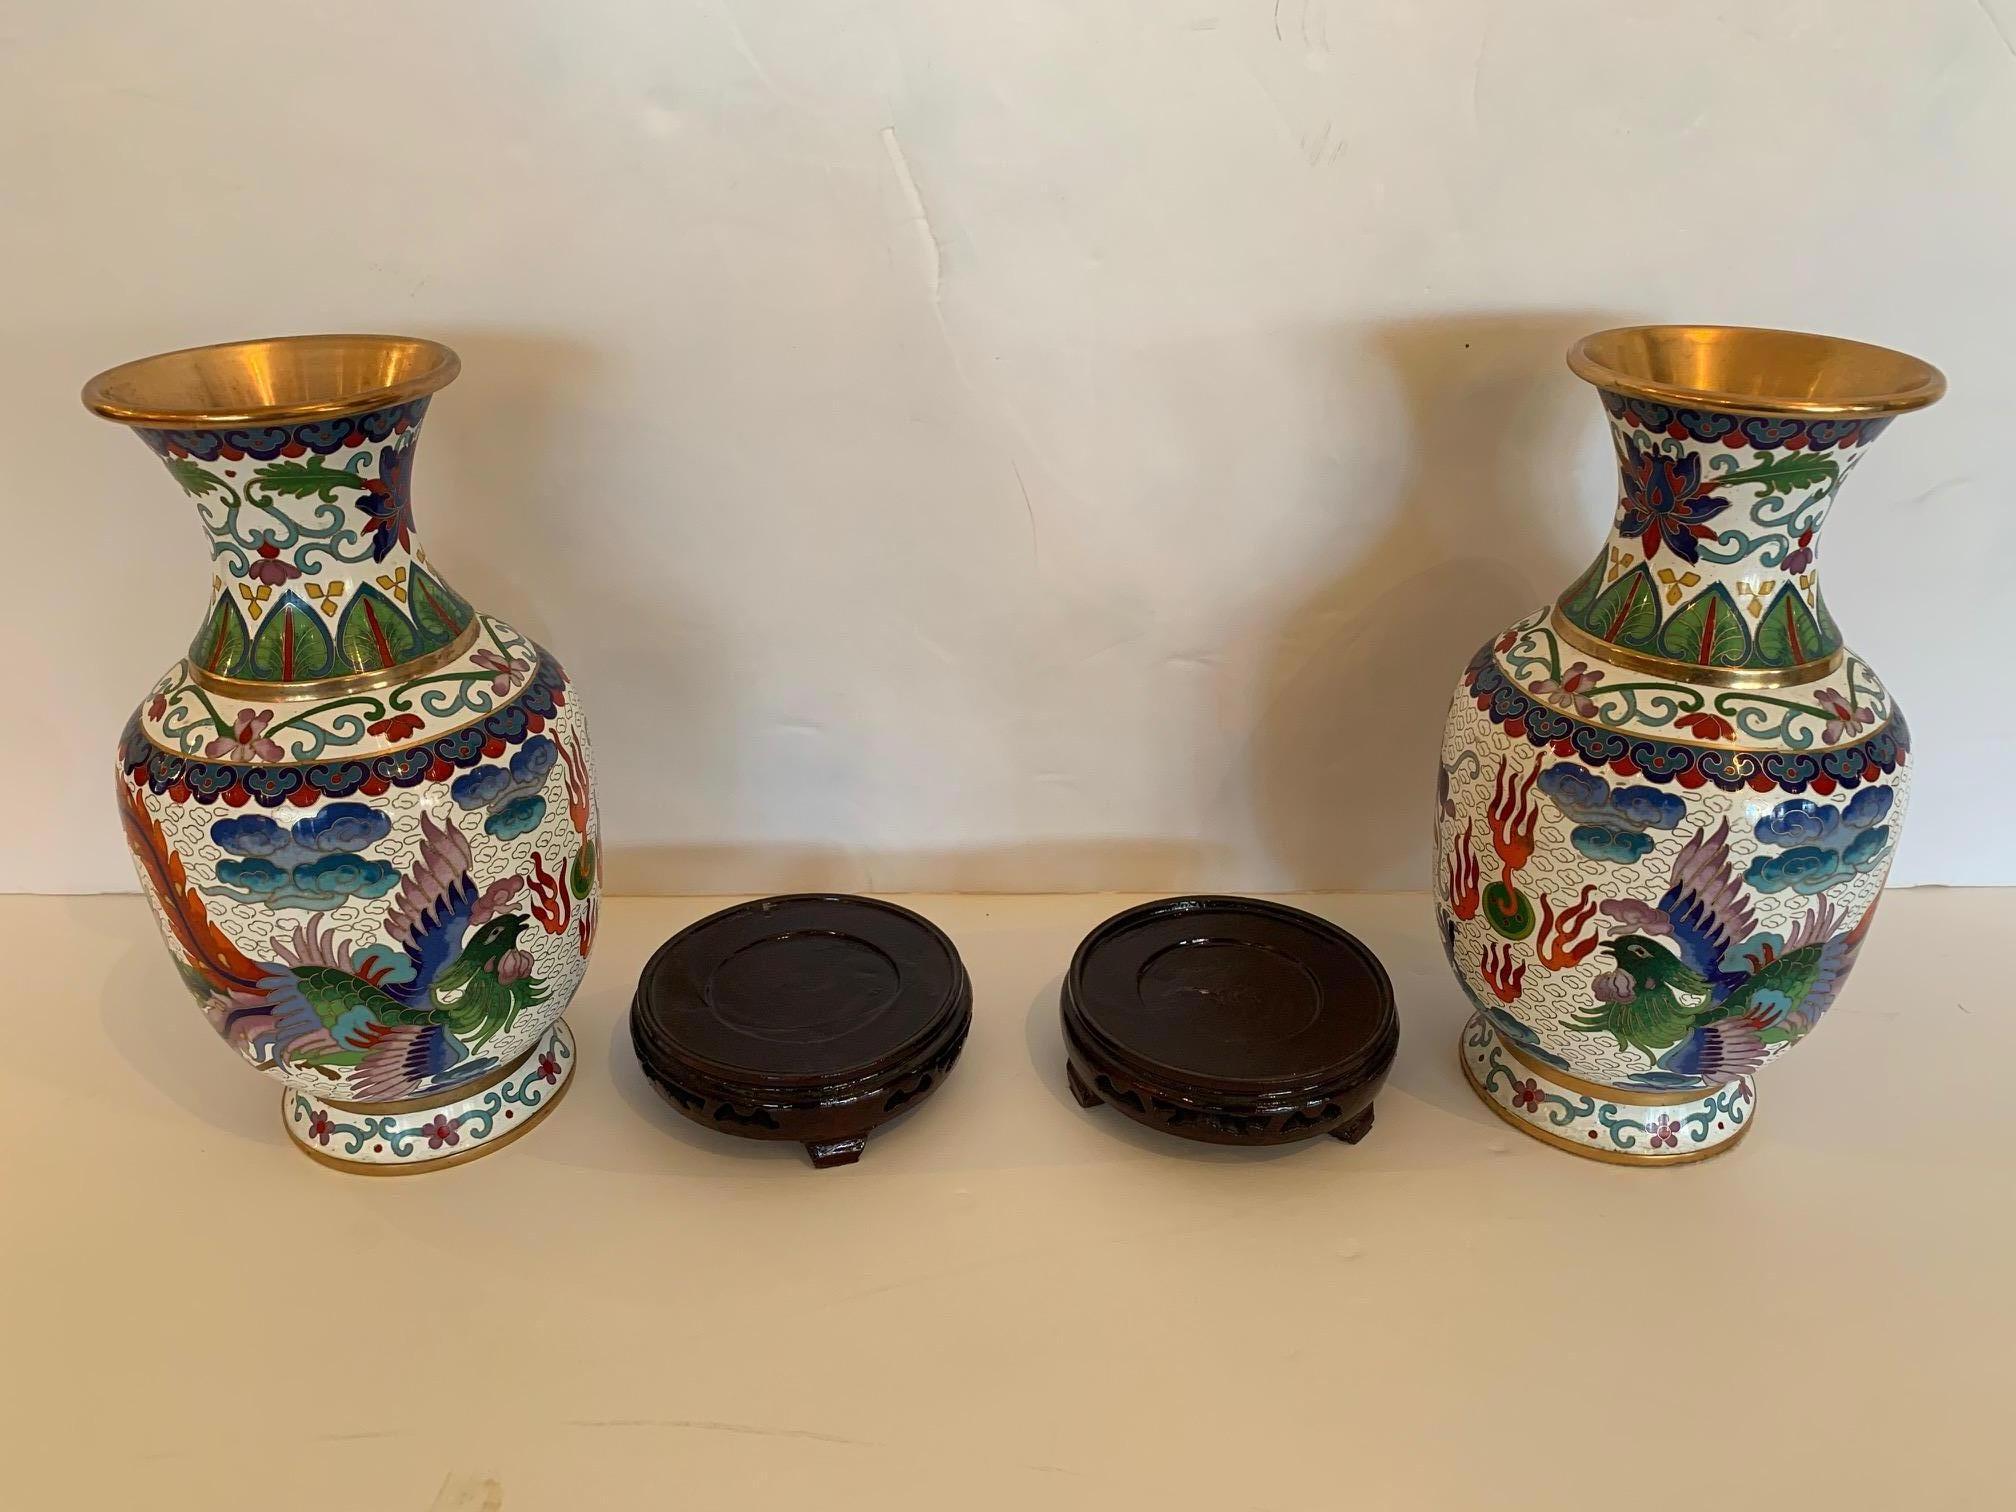 Delightful Pair of Colorful Asian Cloisonné Enamel Vases on Carved Wooden Bases 4